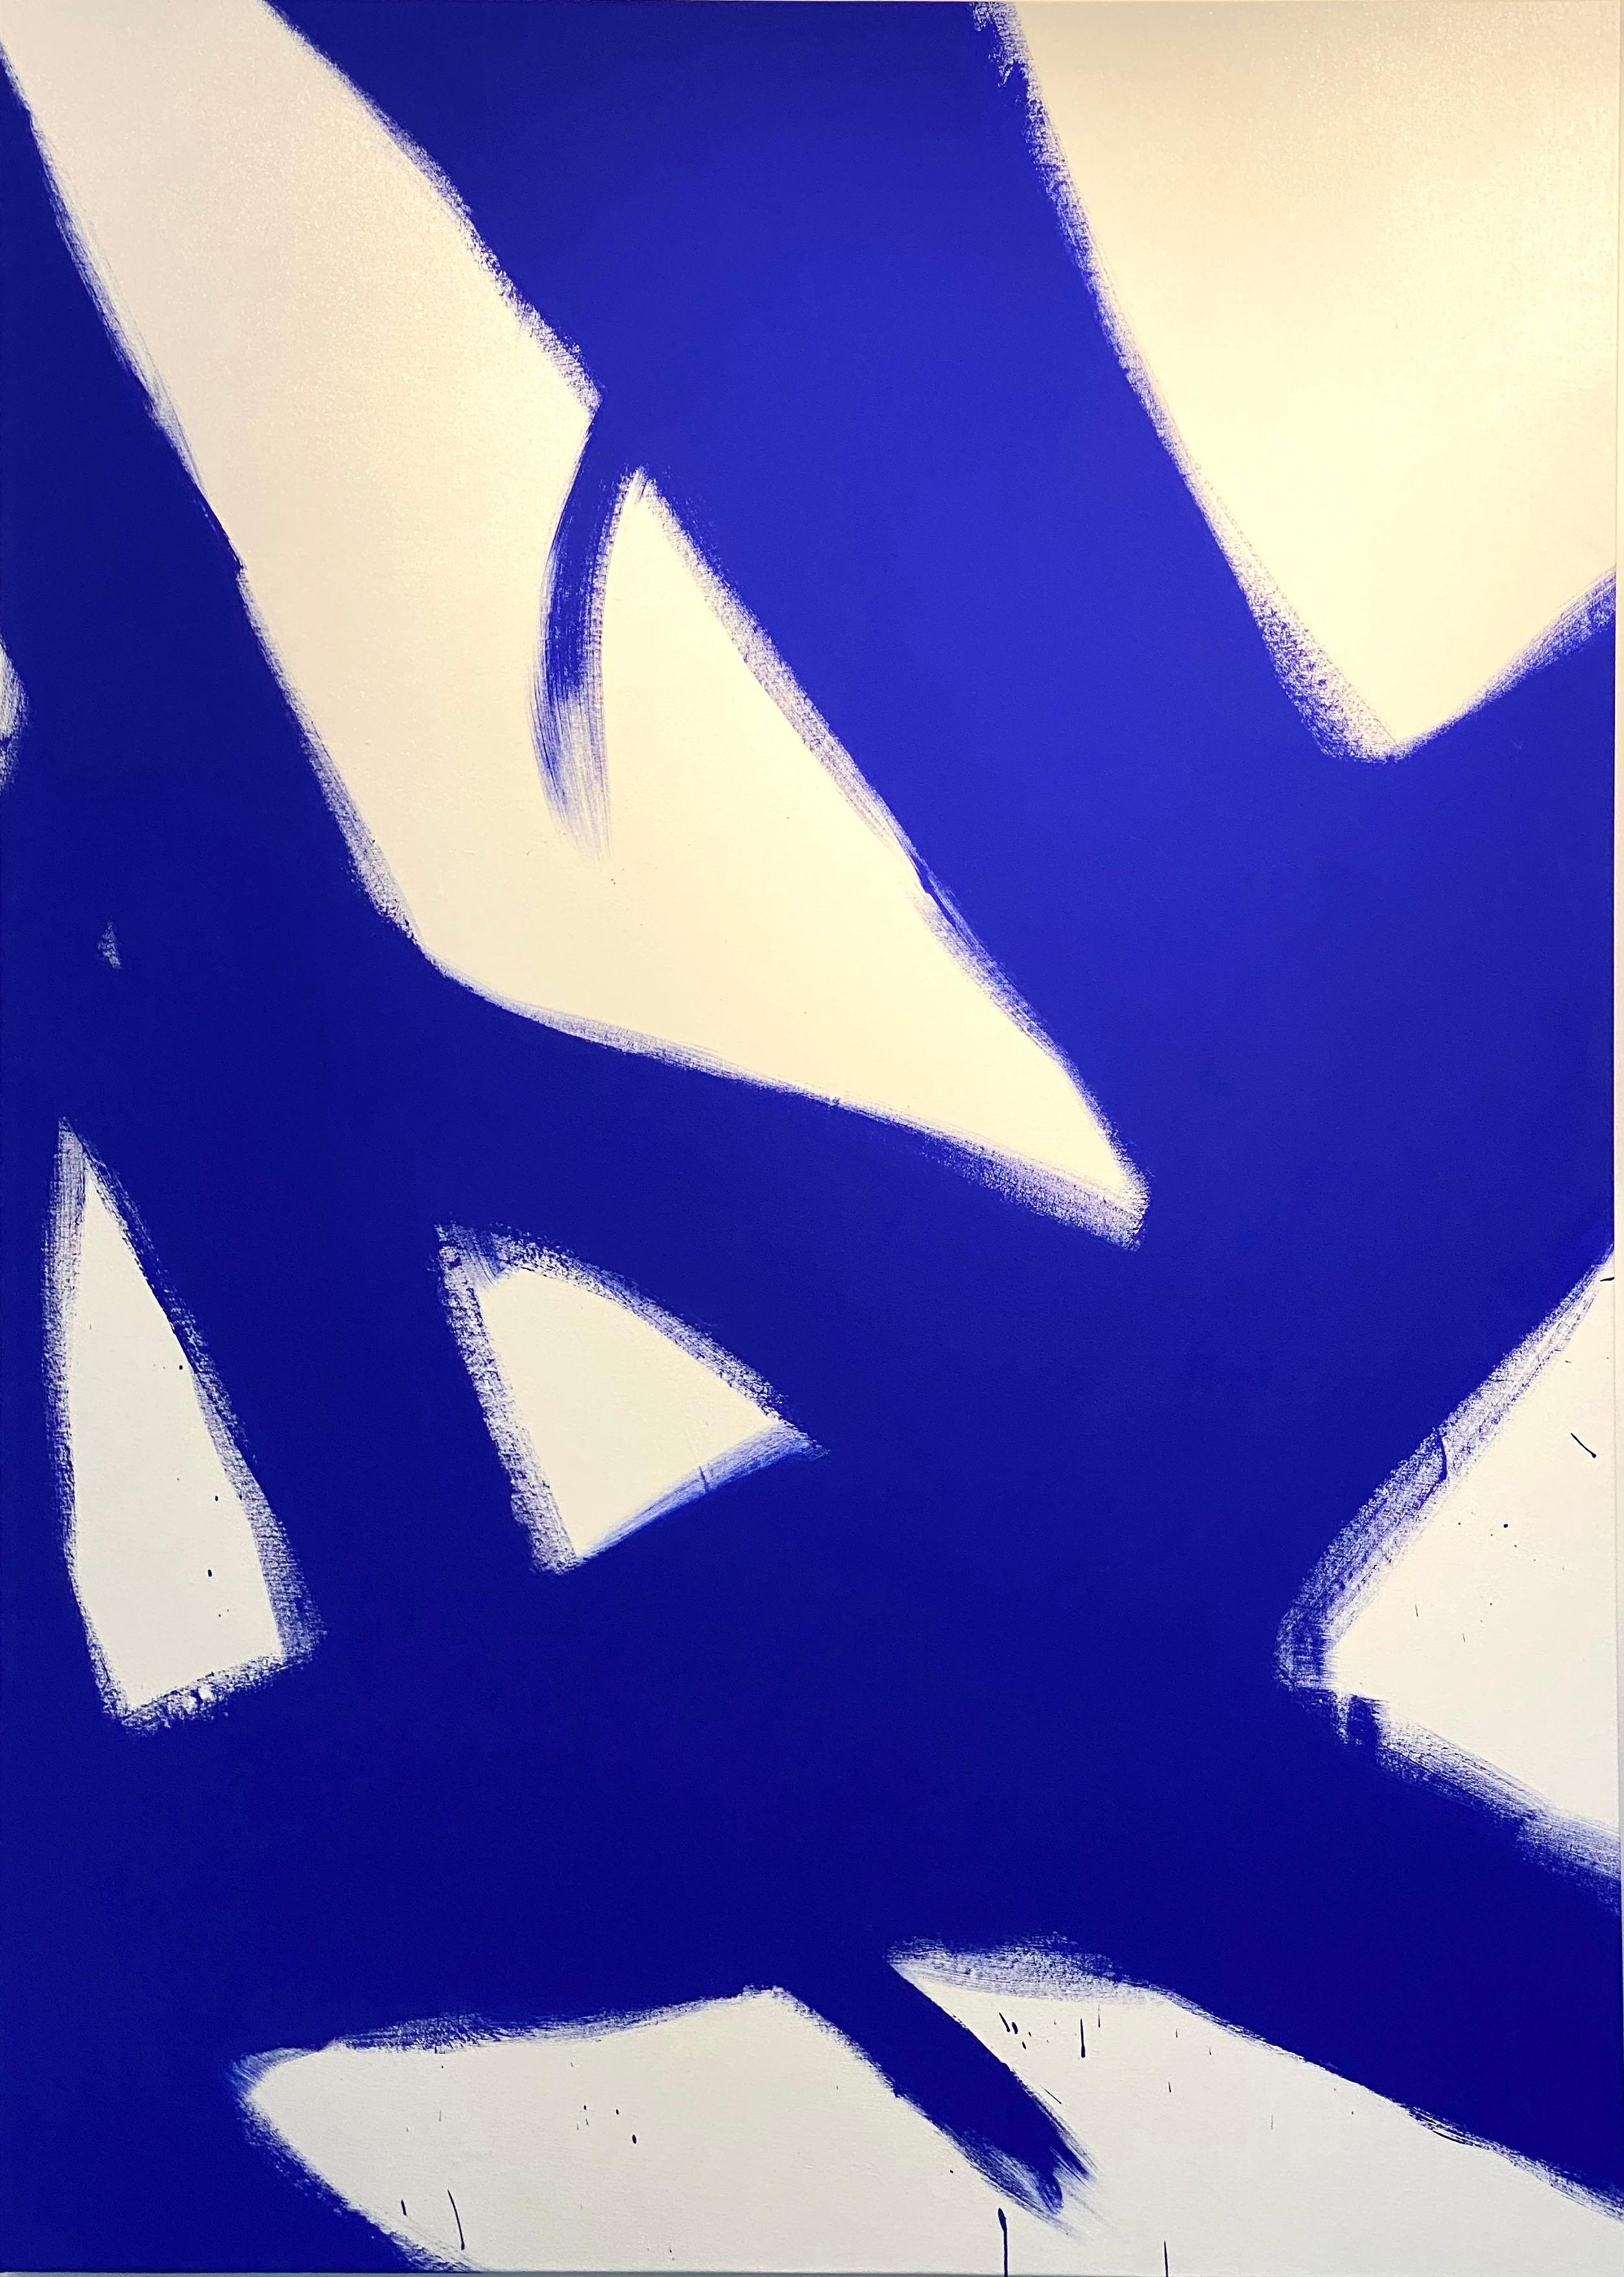 Abstract Yves klein Blue 2